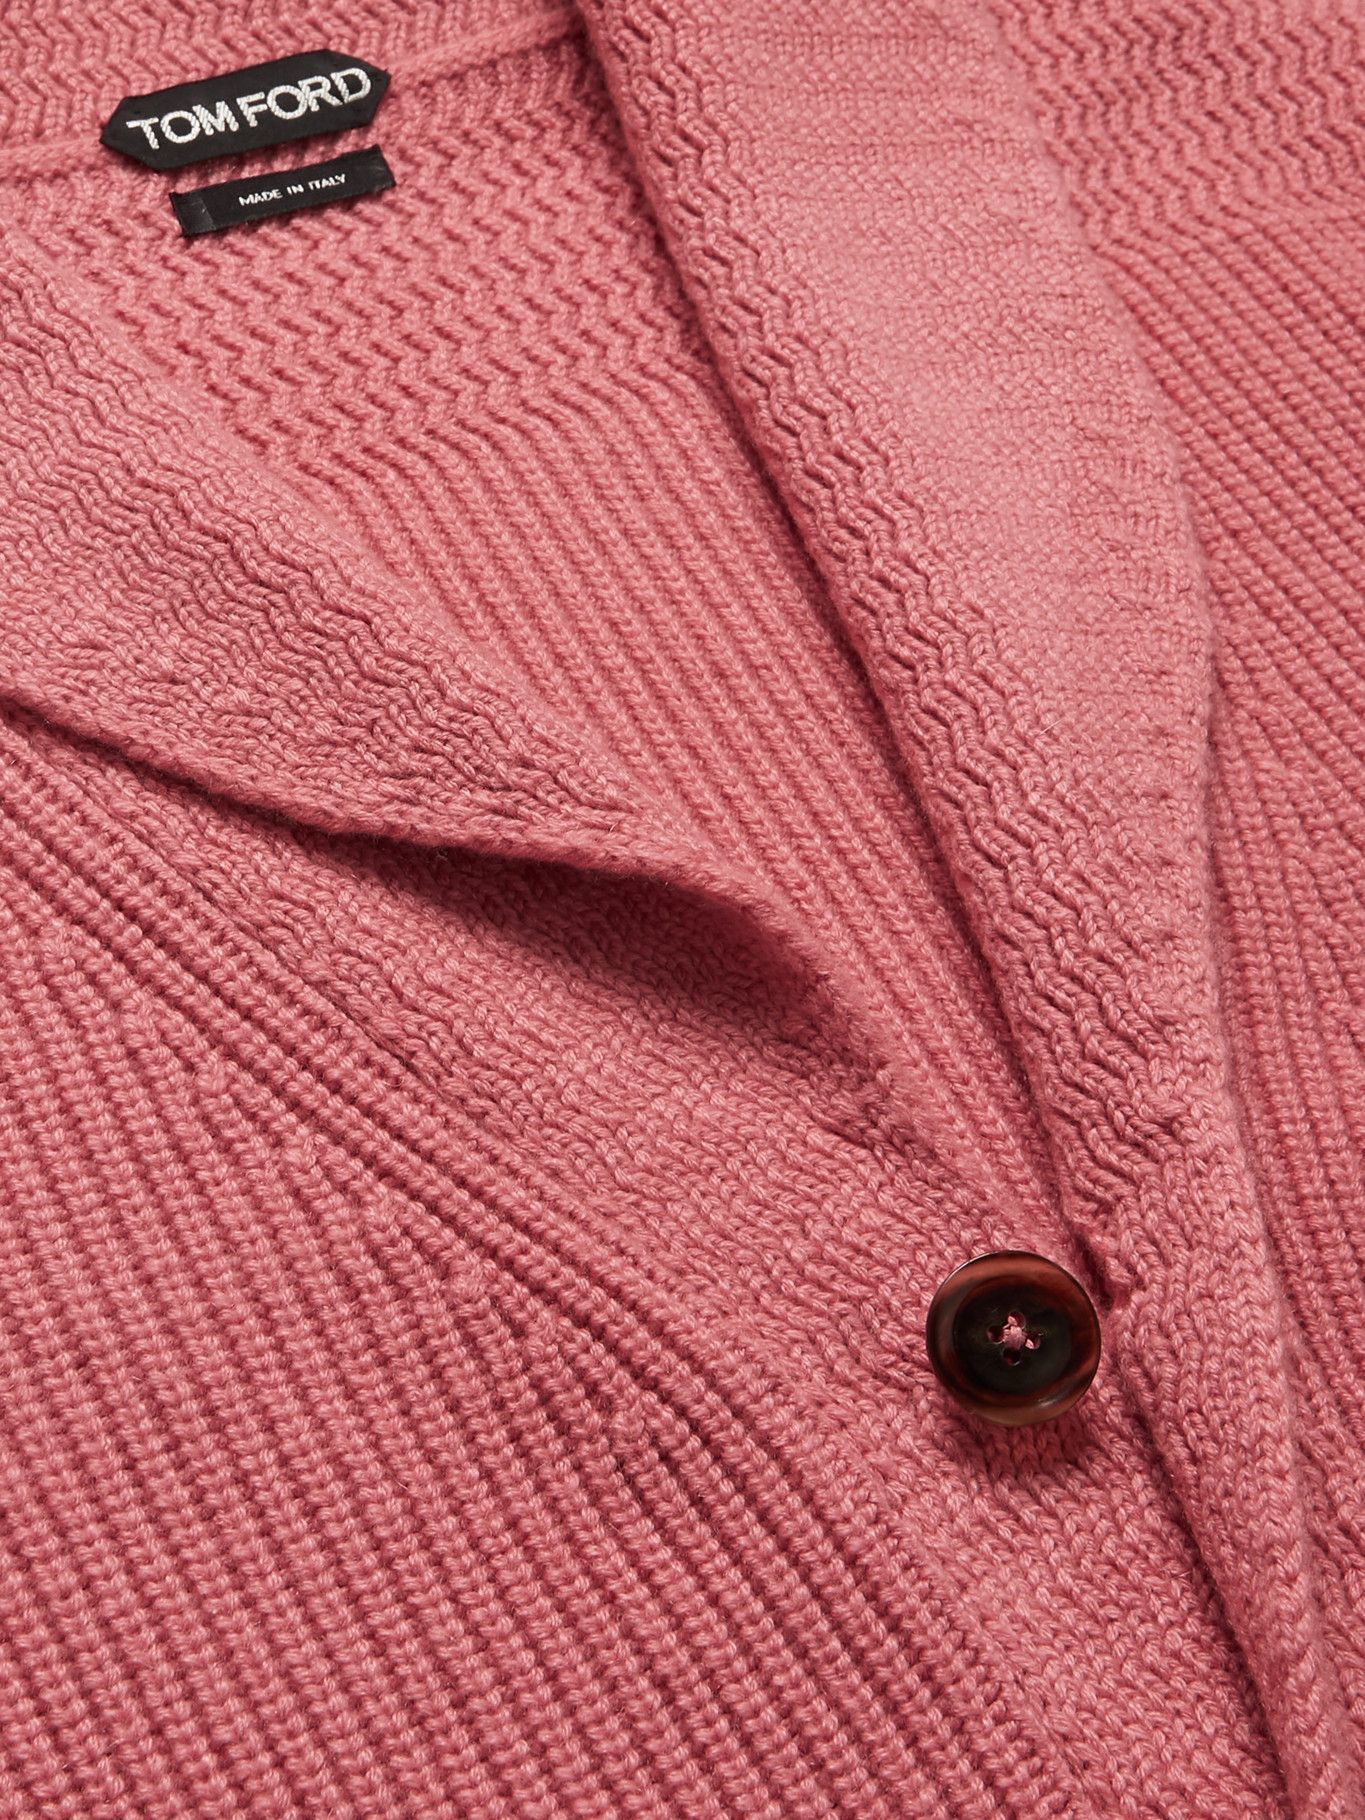 TOM FORD - Ribbed Cashmere Cardigan - Pink TOM FORD